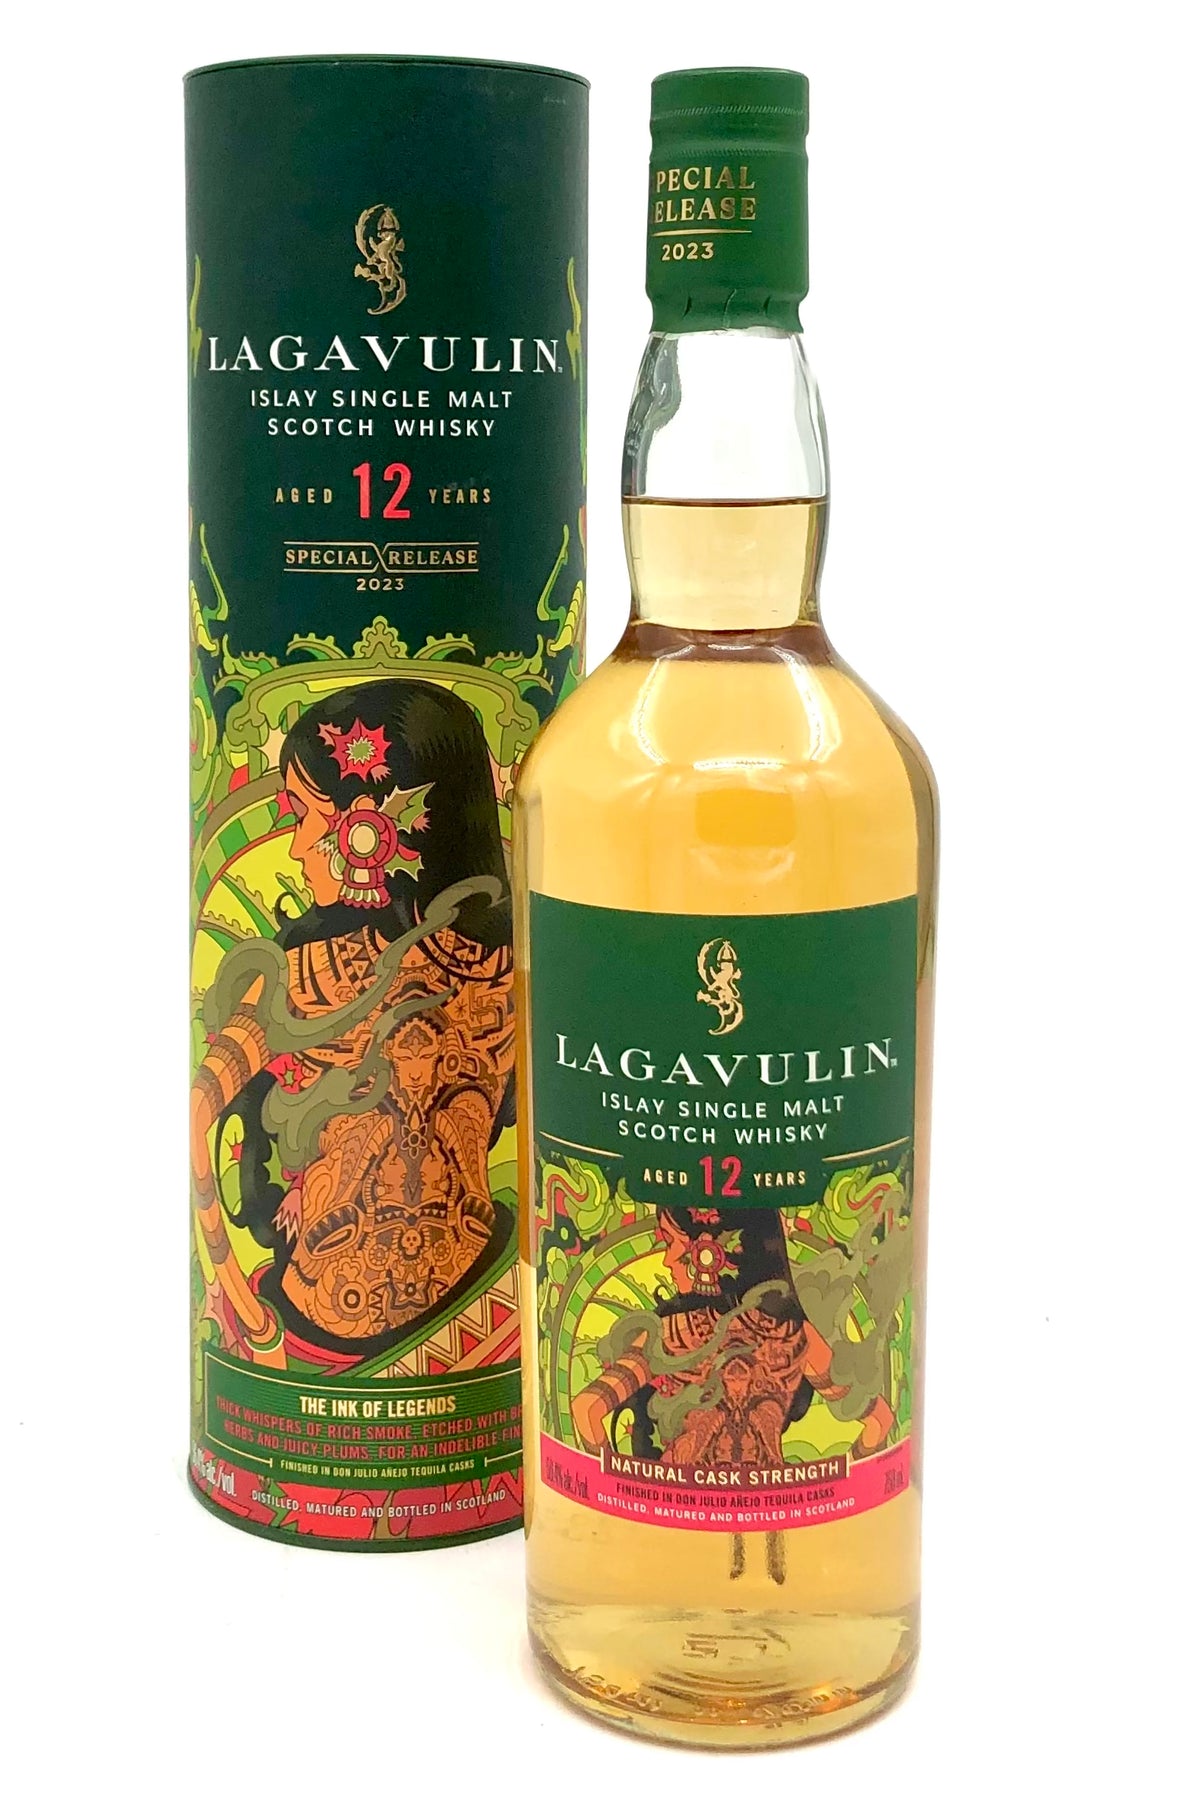 Lagavulin 12 Year Scotch Whisky 2023 Diageo Special Release